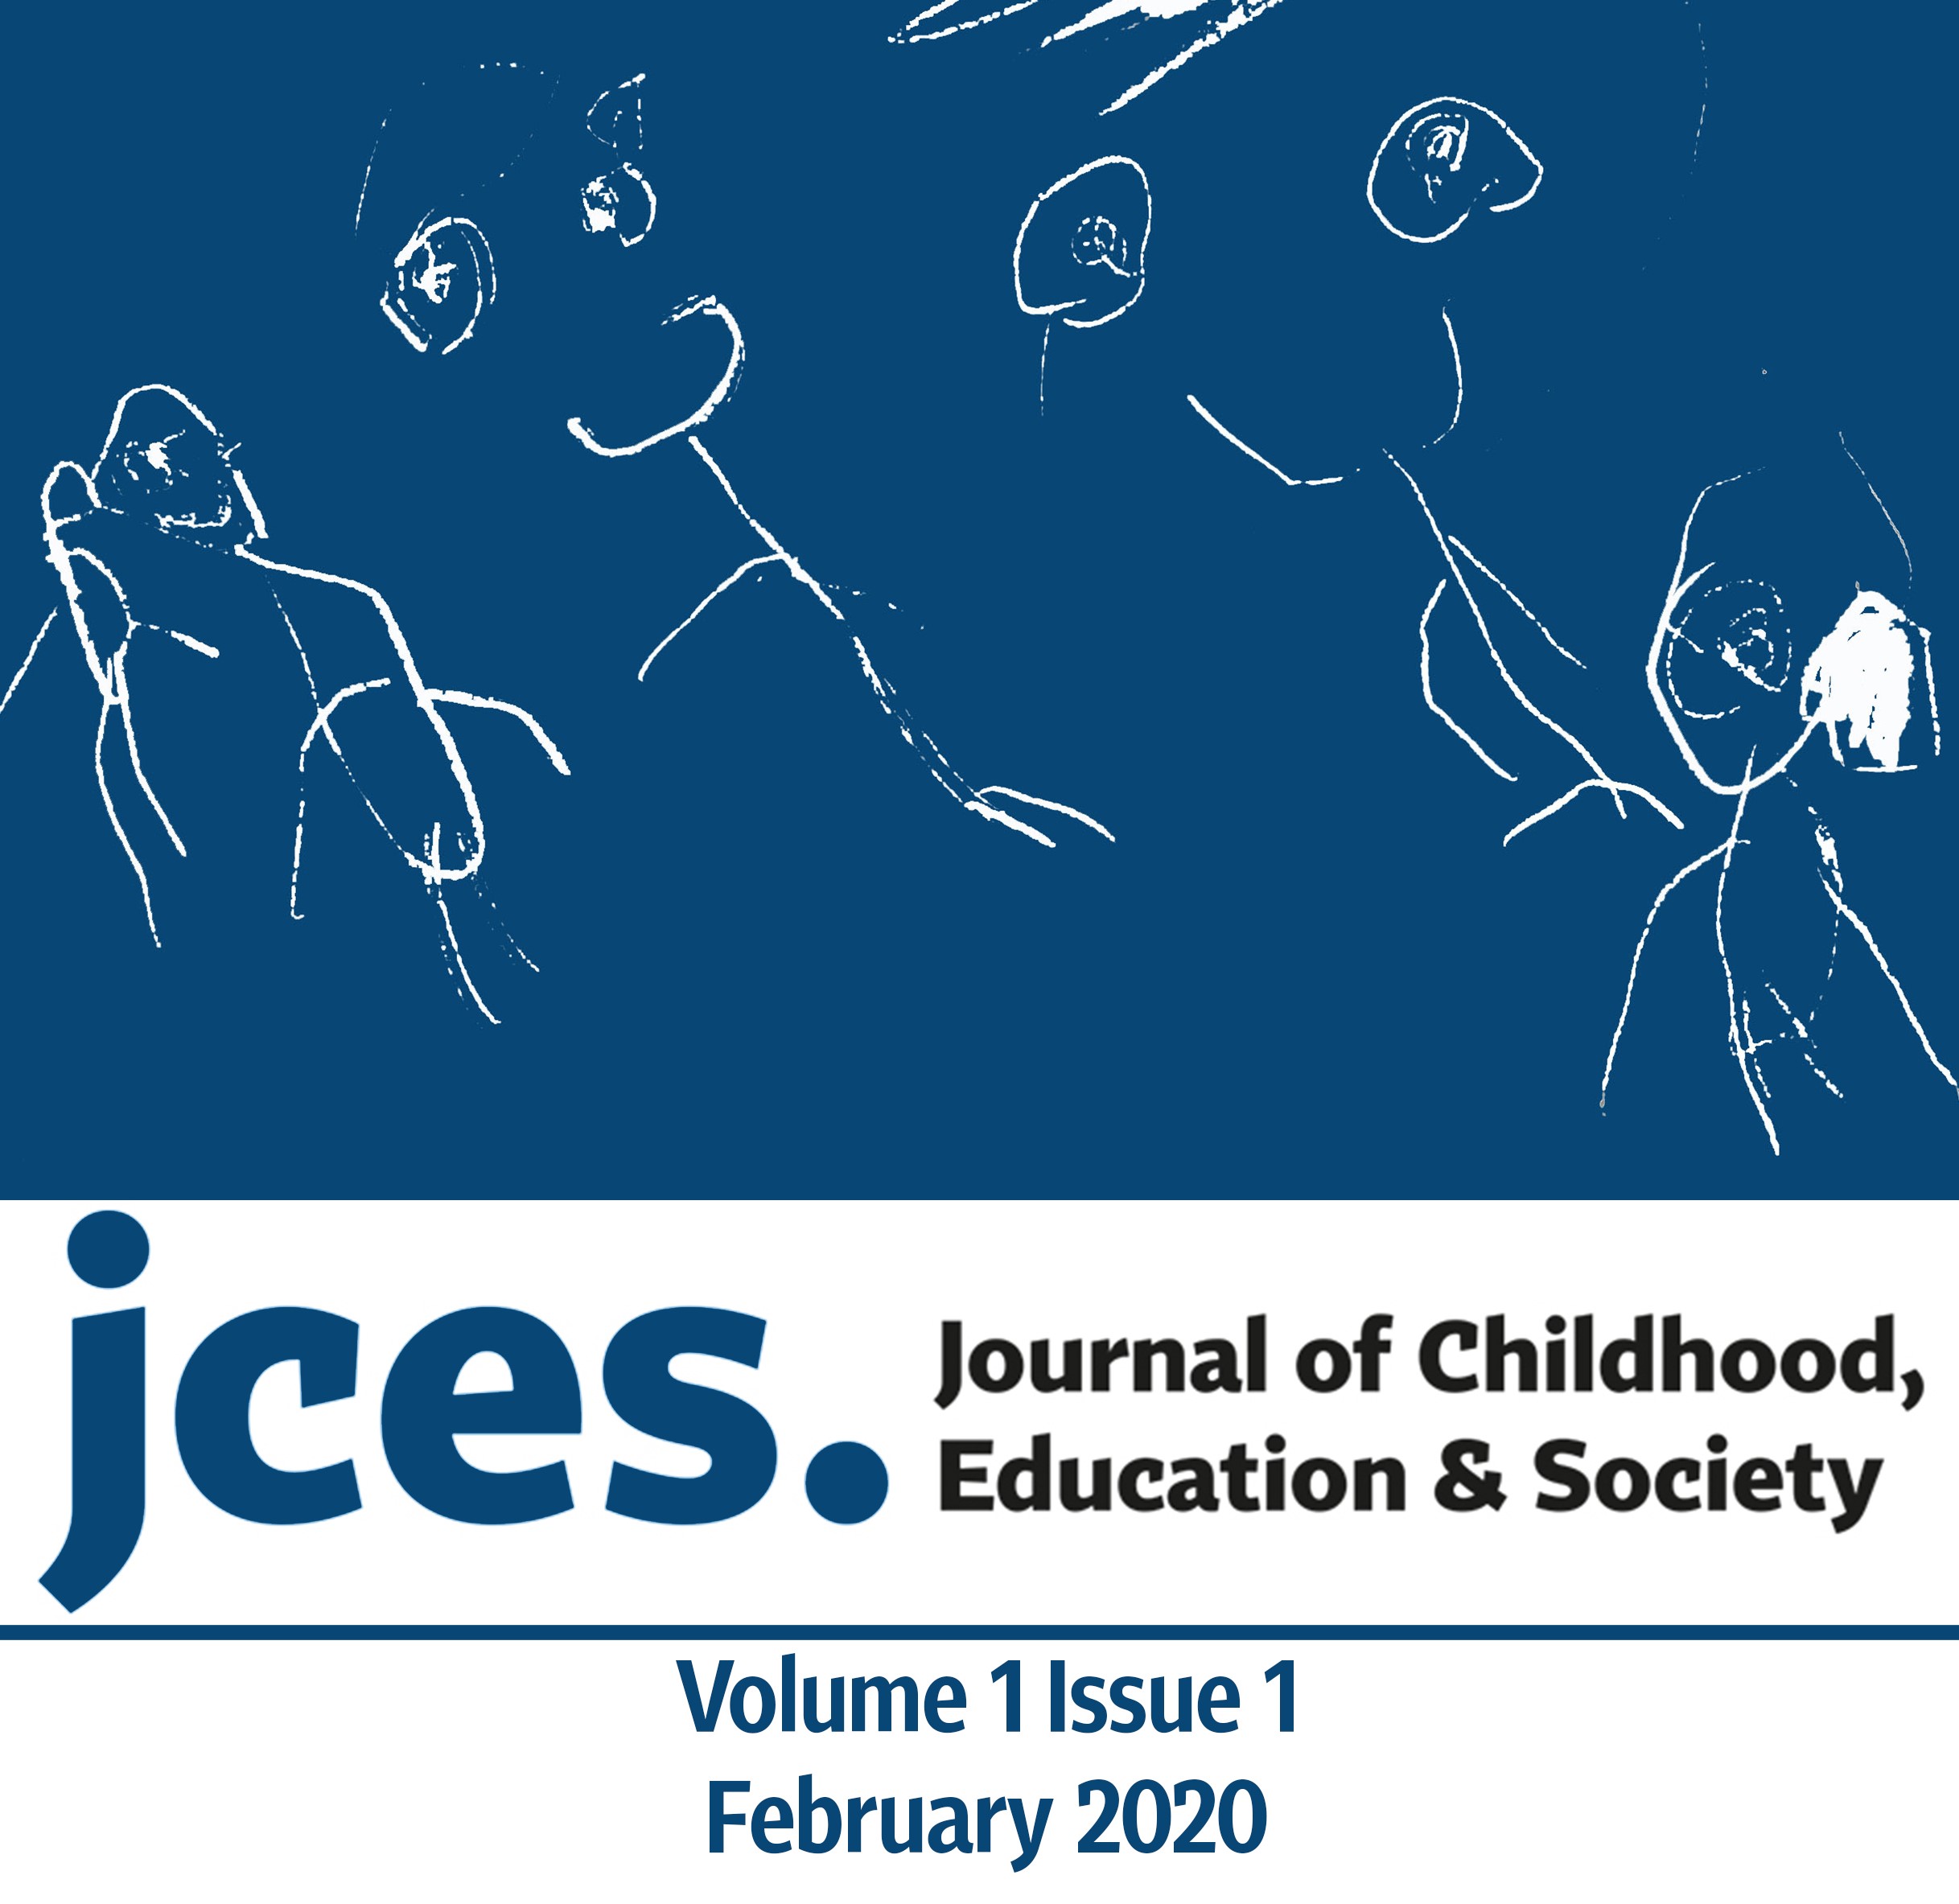 					View Vol. 1 No. 1 (2020): Journal of Childhood, Education & Society
				